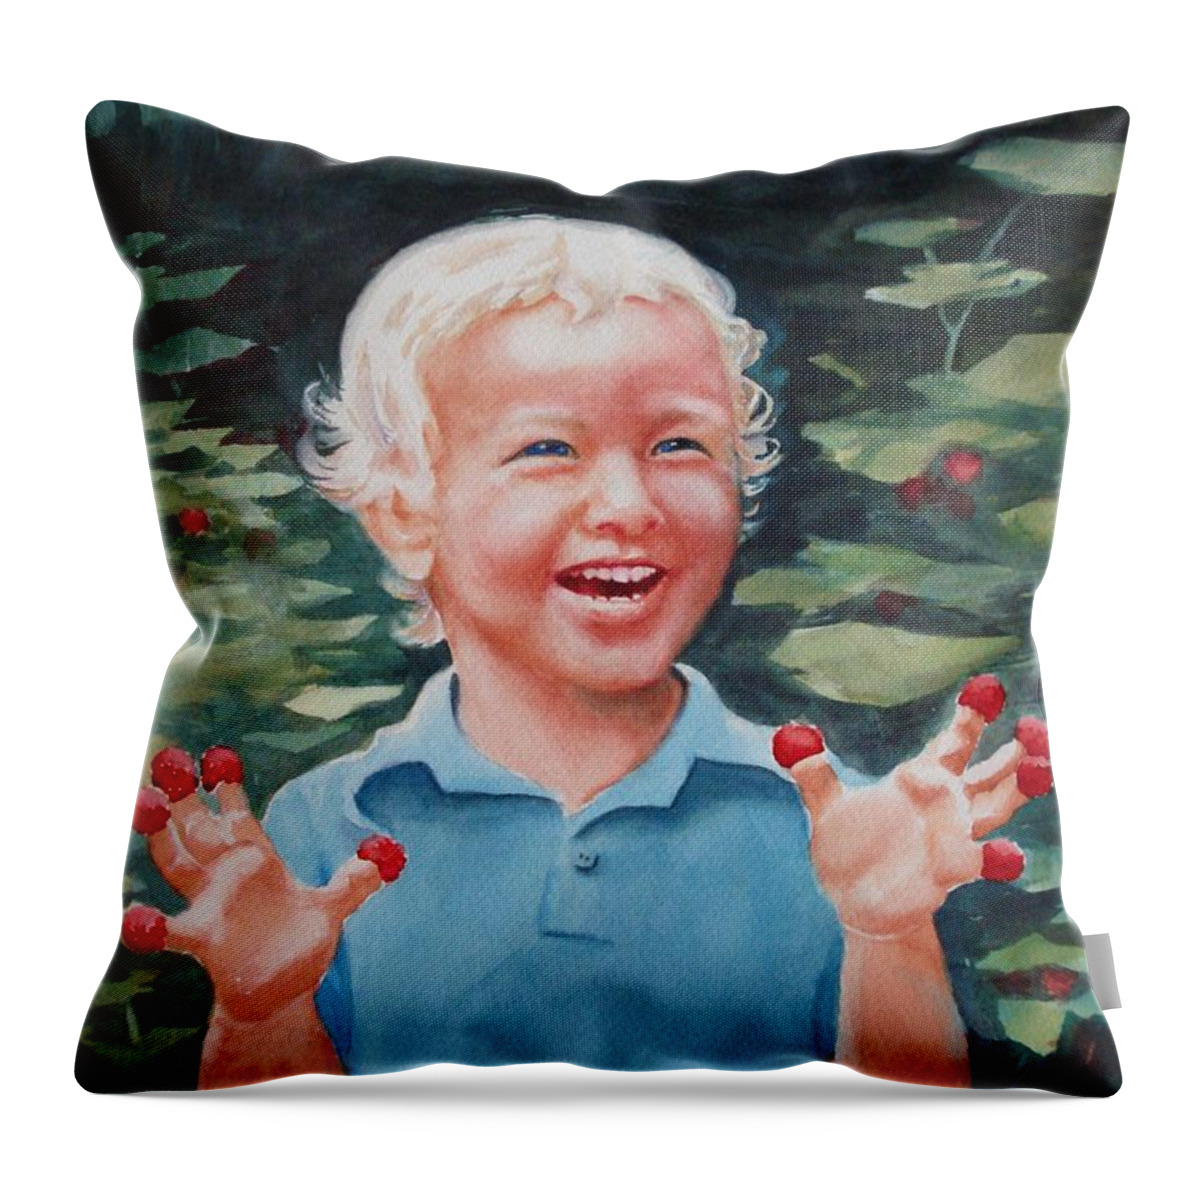 Boy Throw Pillow featuring the painting Boy With Raspberries by Marilyn Jacobson